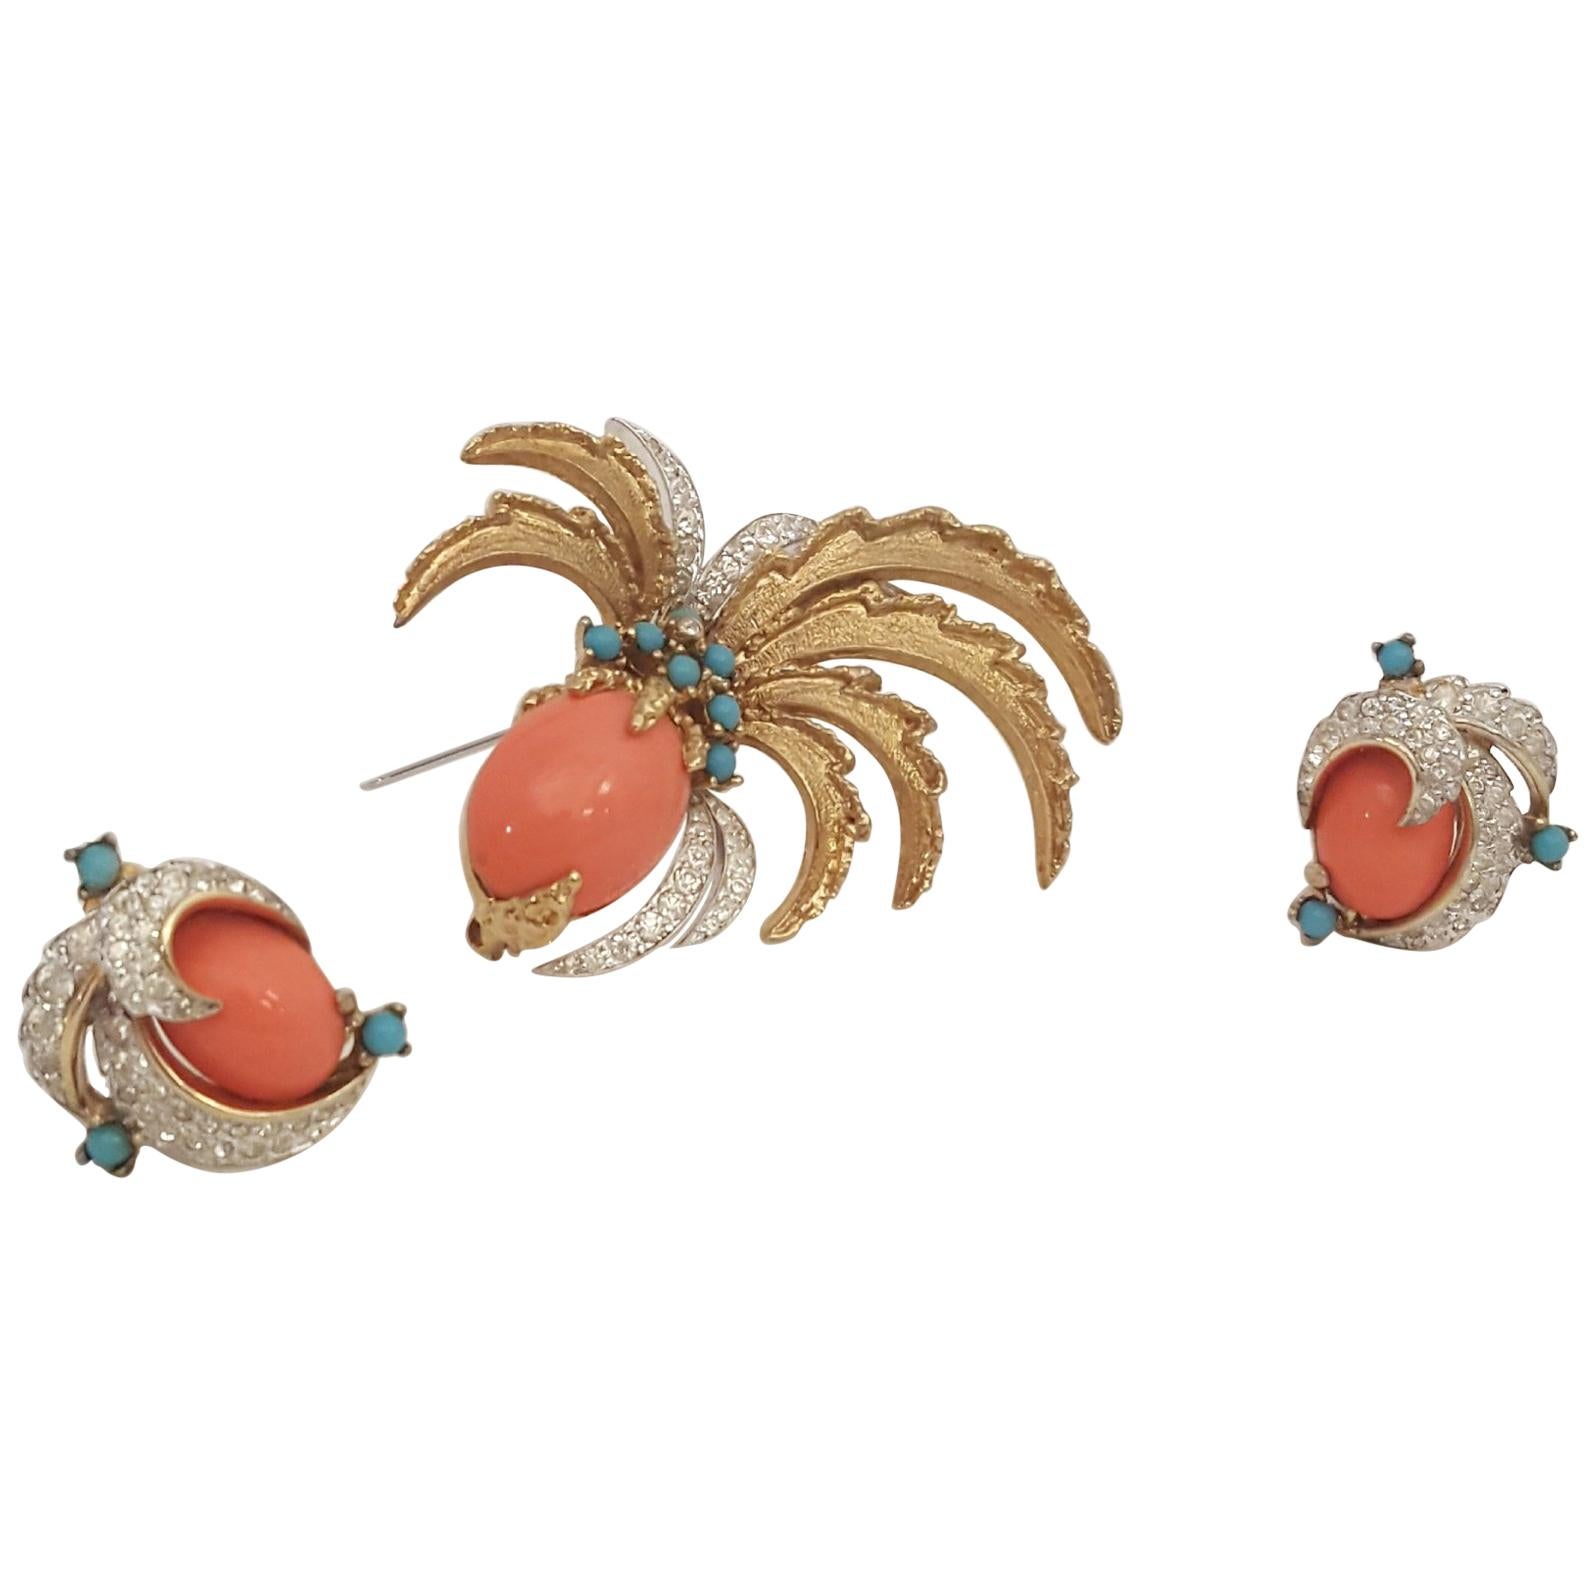 Jomaz Goldtone Coral, Turquoise and Crystals Brooch and Earrings